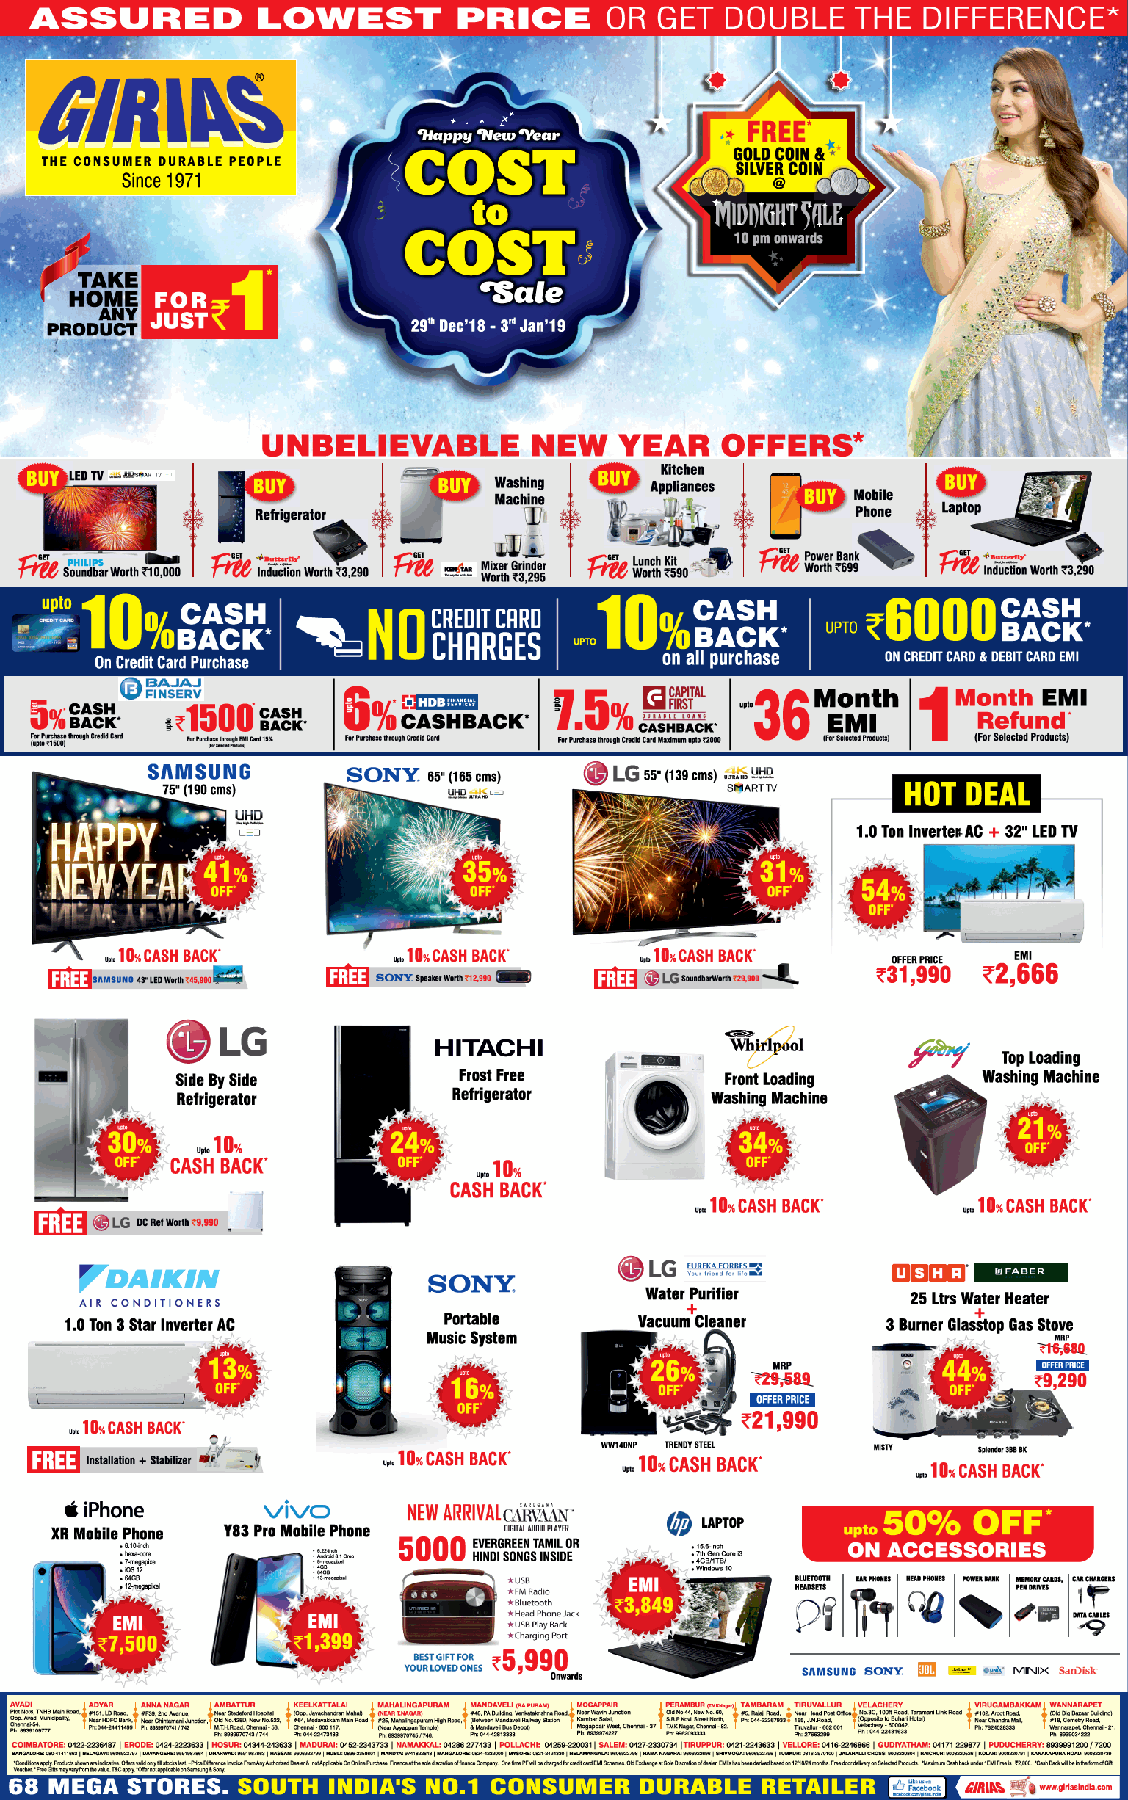 girias-cost-to-cost-sale-unbelievable-new-year-offers-ad-chennai-times-01-01-2019.png